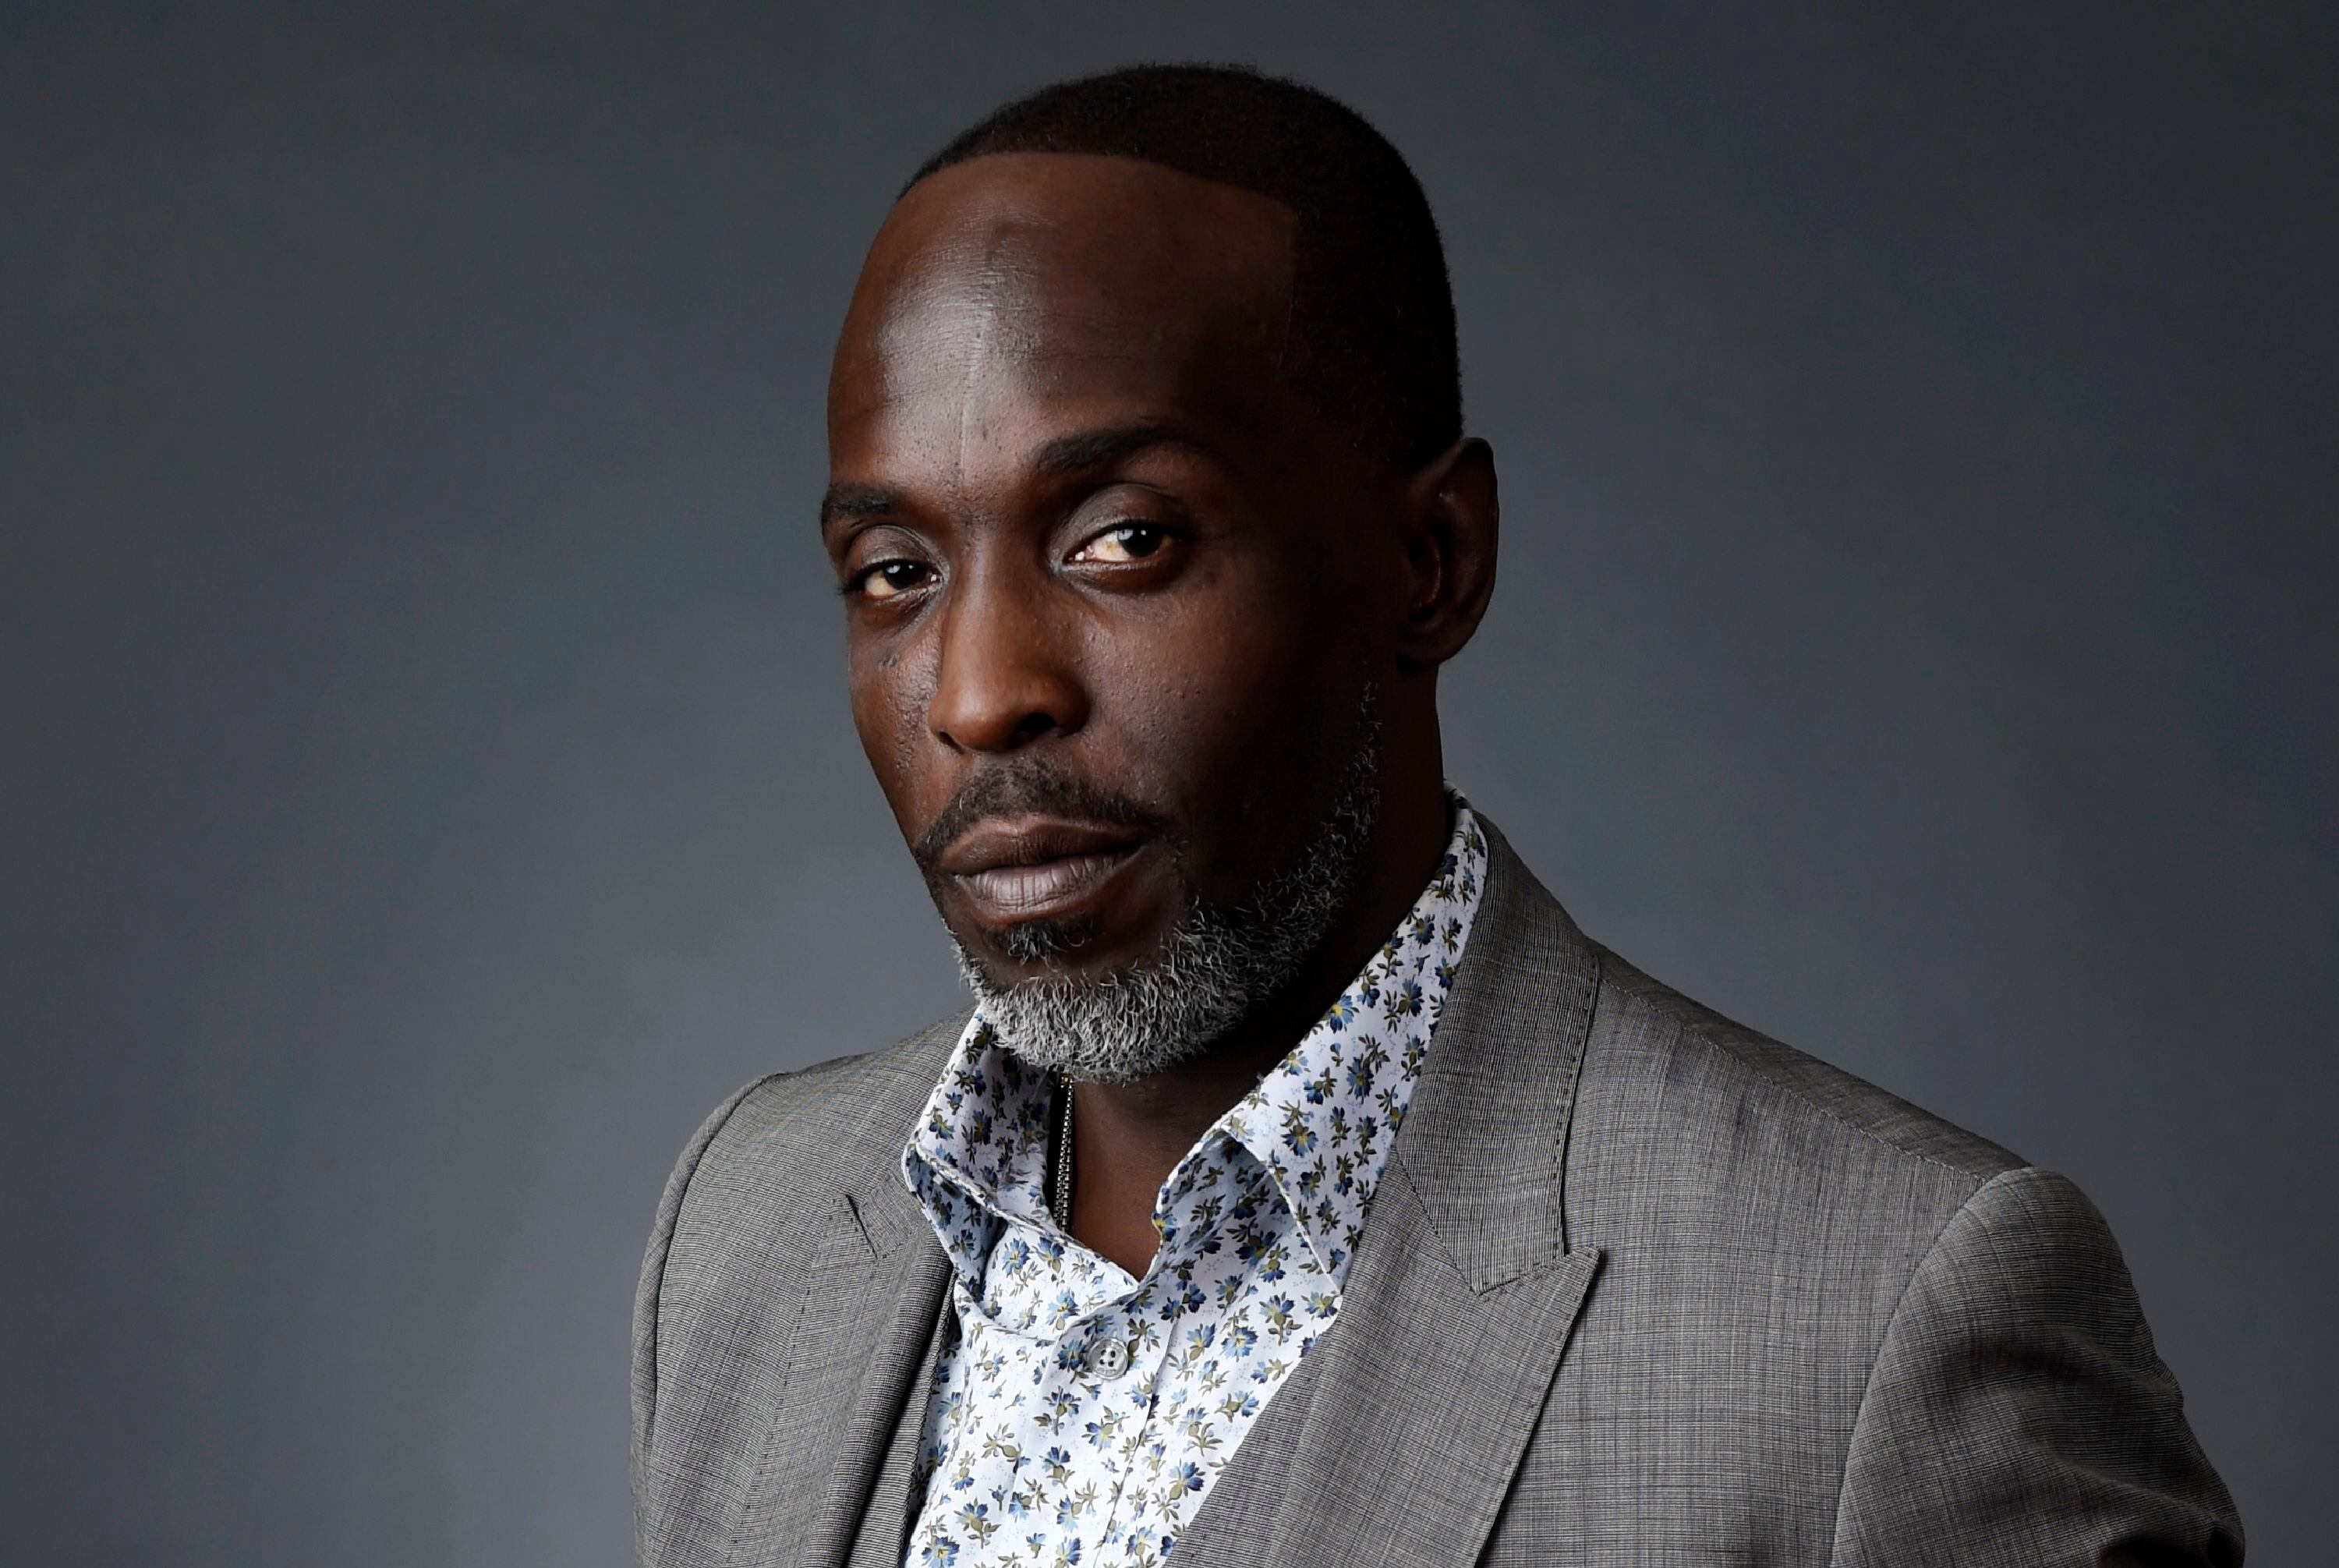 4 charged after overdose death of actor Michael K. Williams